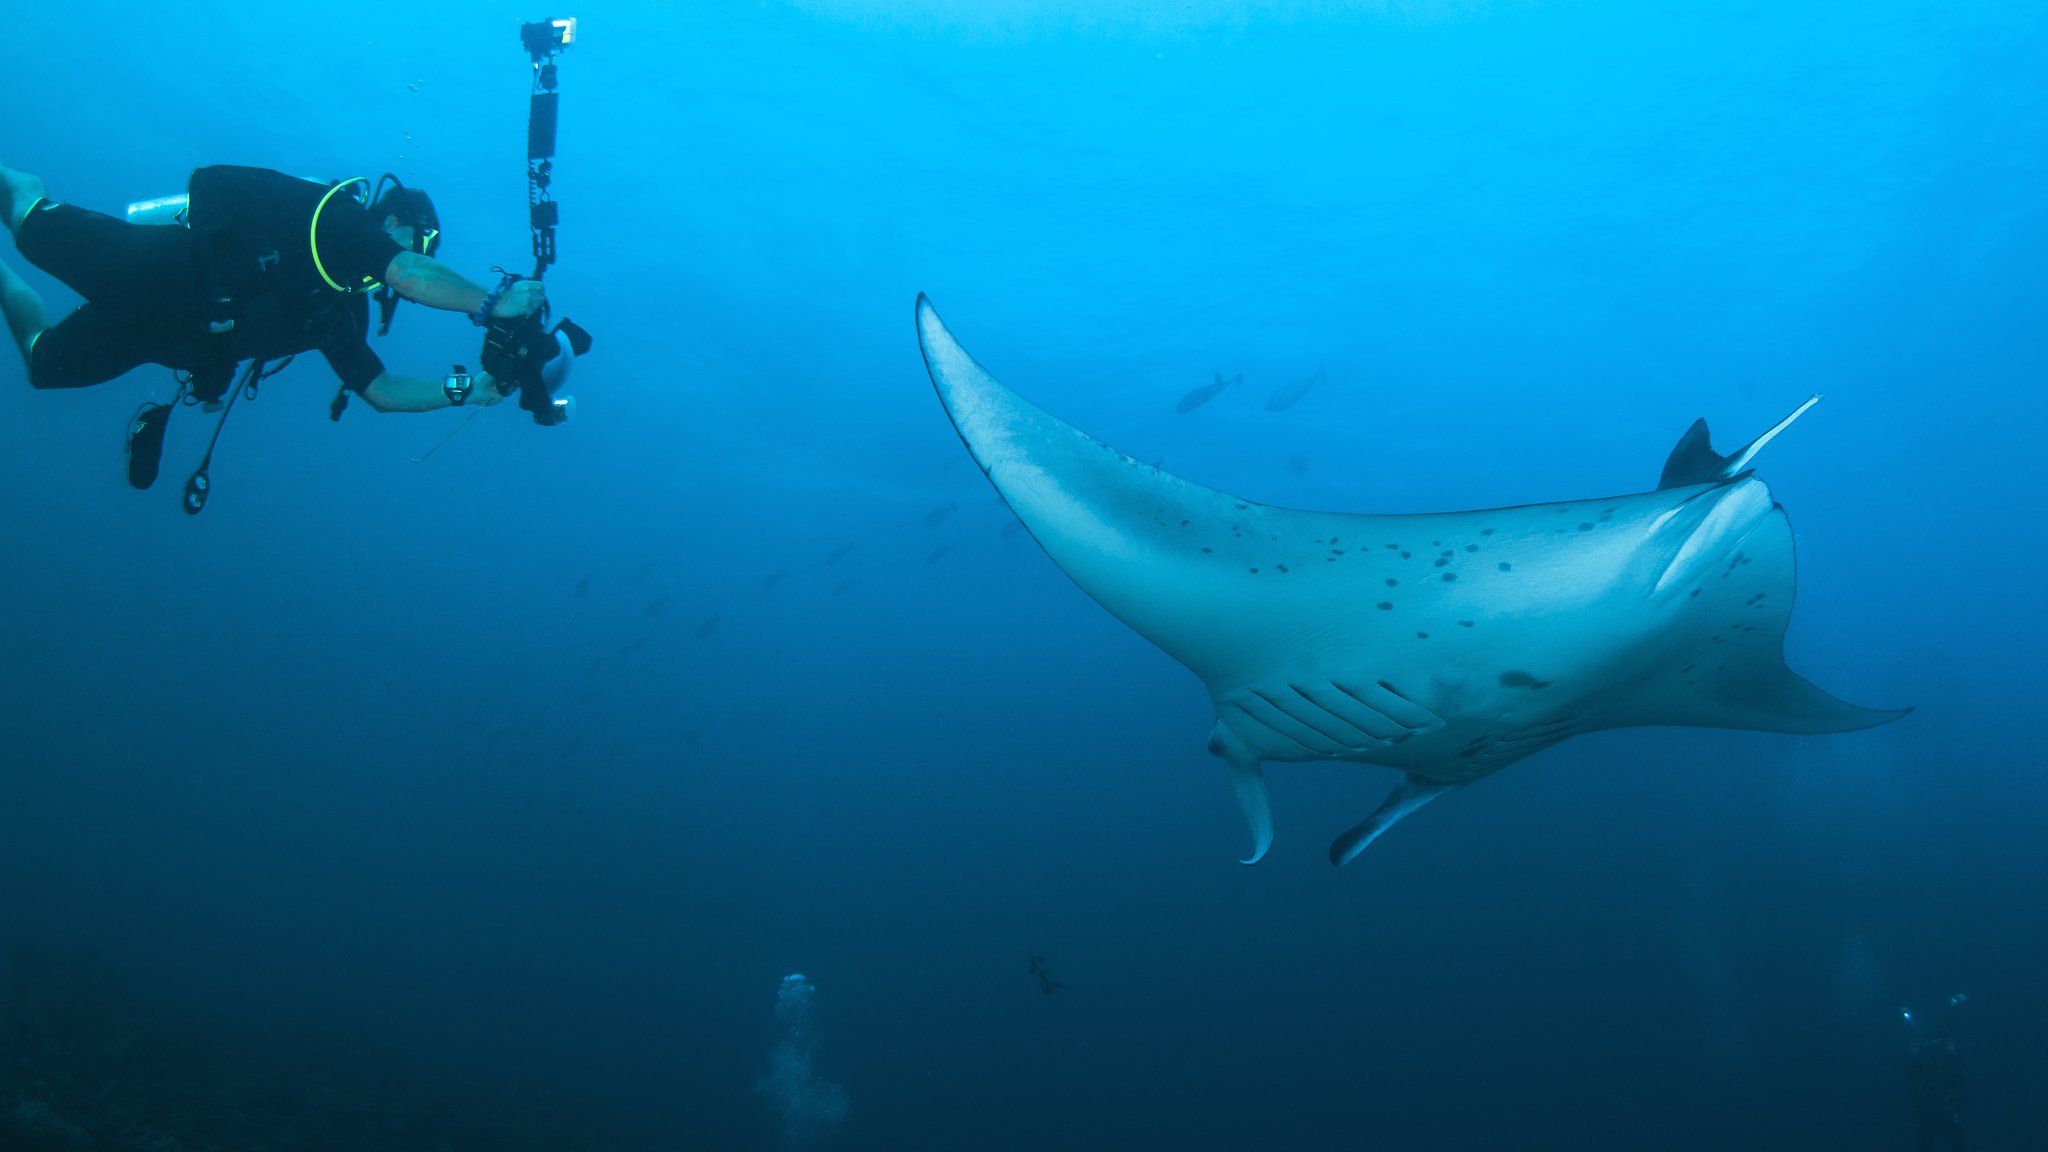 Giant manta rays can be identified by their spots and blotches